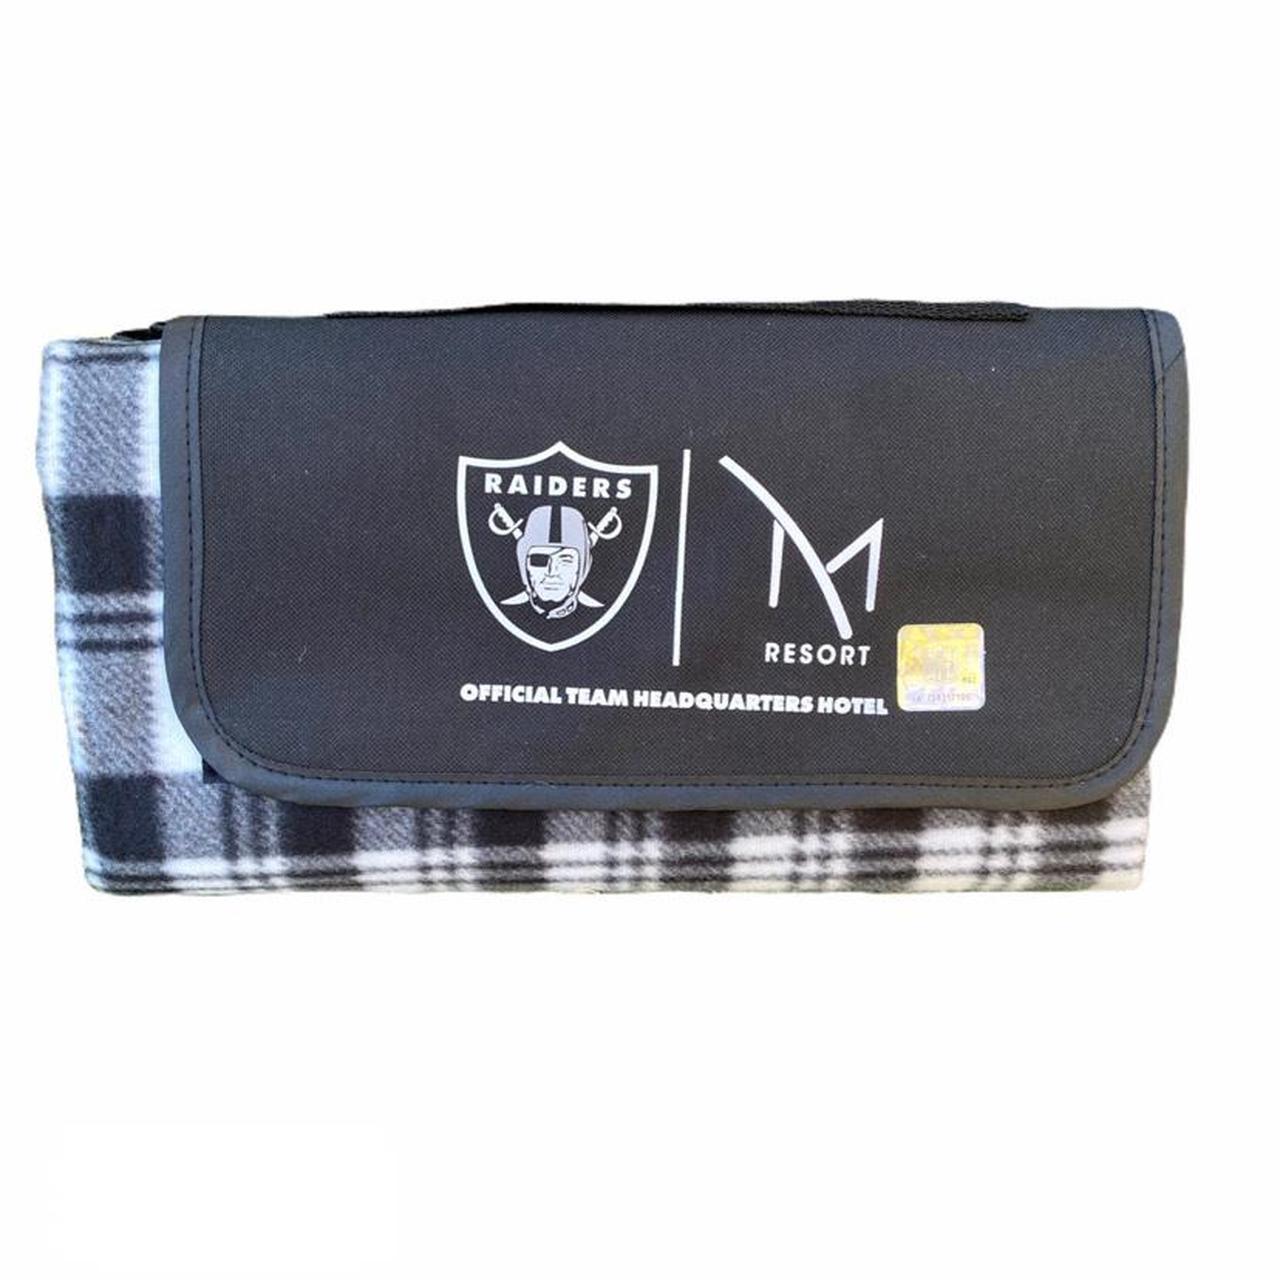 Product Image 1 - NFL Raiders Checkered Outdoor Blanket.